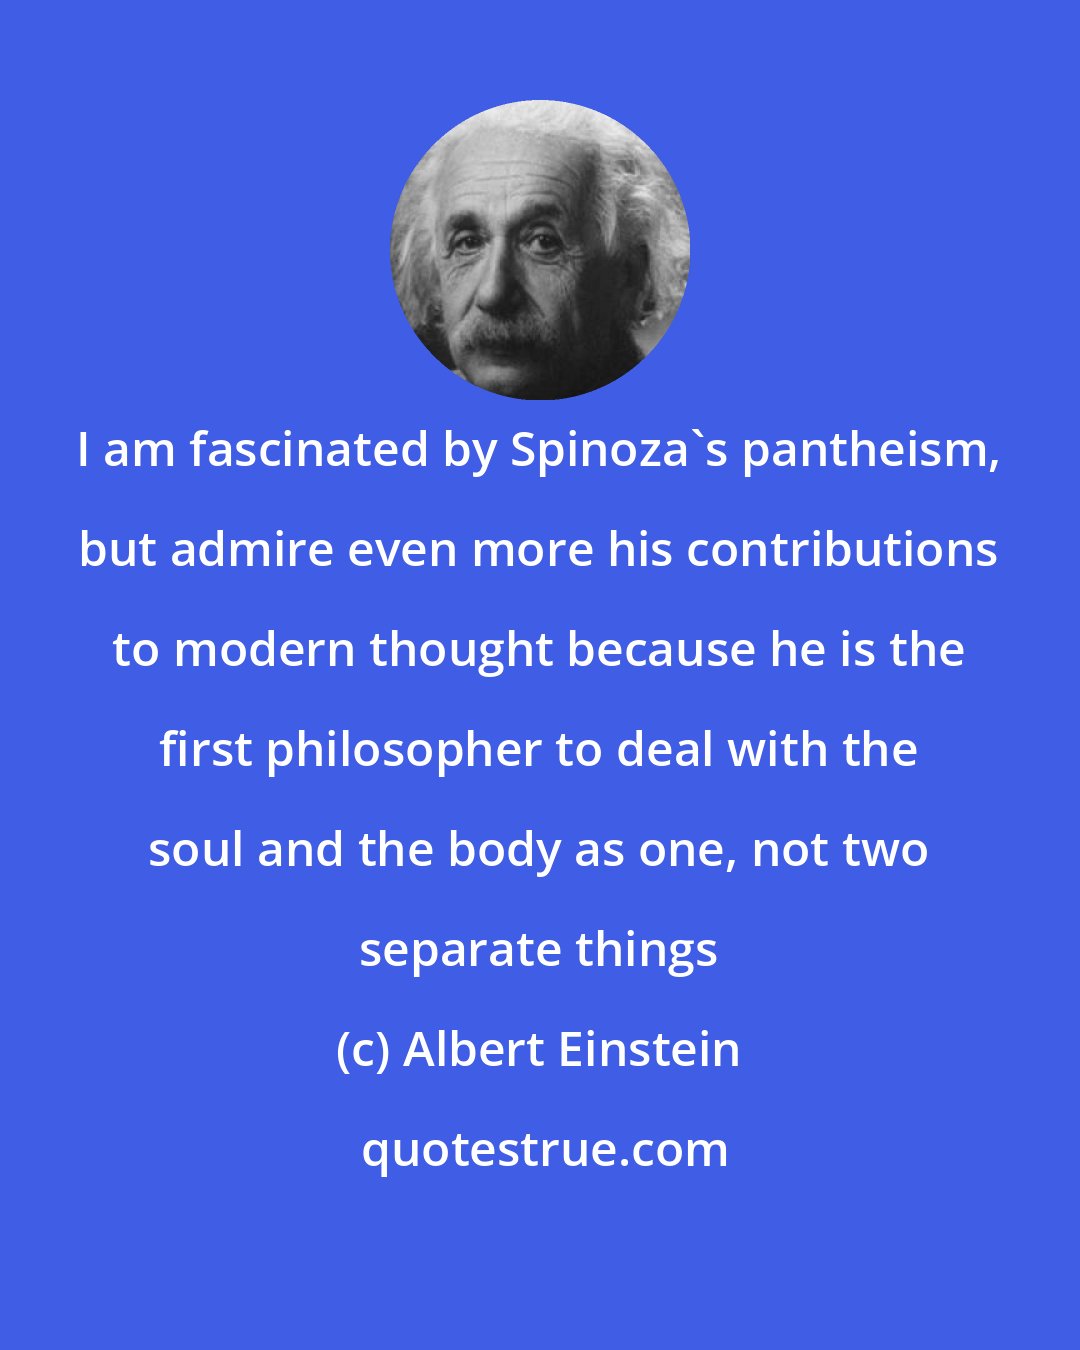 Albert Einstein: I am fascinated by Spinoza's pantheism, but admire even more his contributions to modern thought because he is the first philosopher to deal with the soul and the body as one, not two separate things